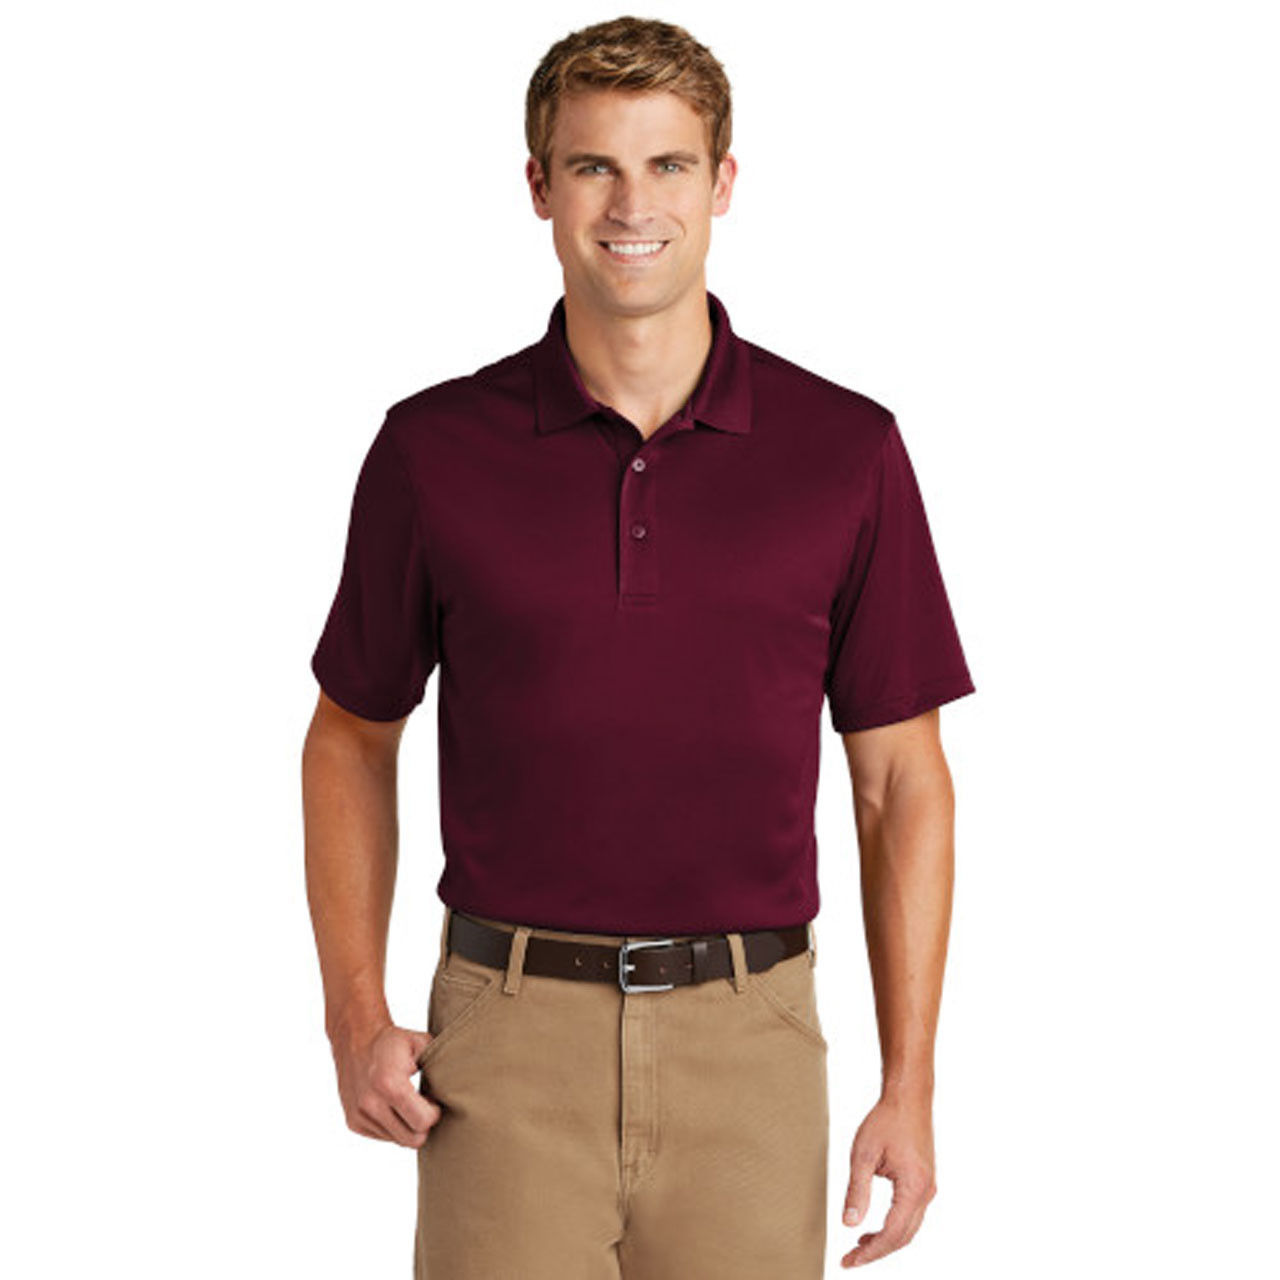 What is the material of the men's maroon polo shirt?